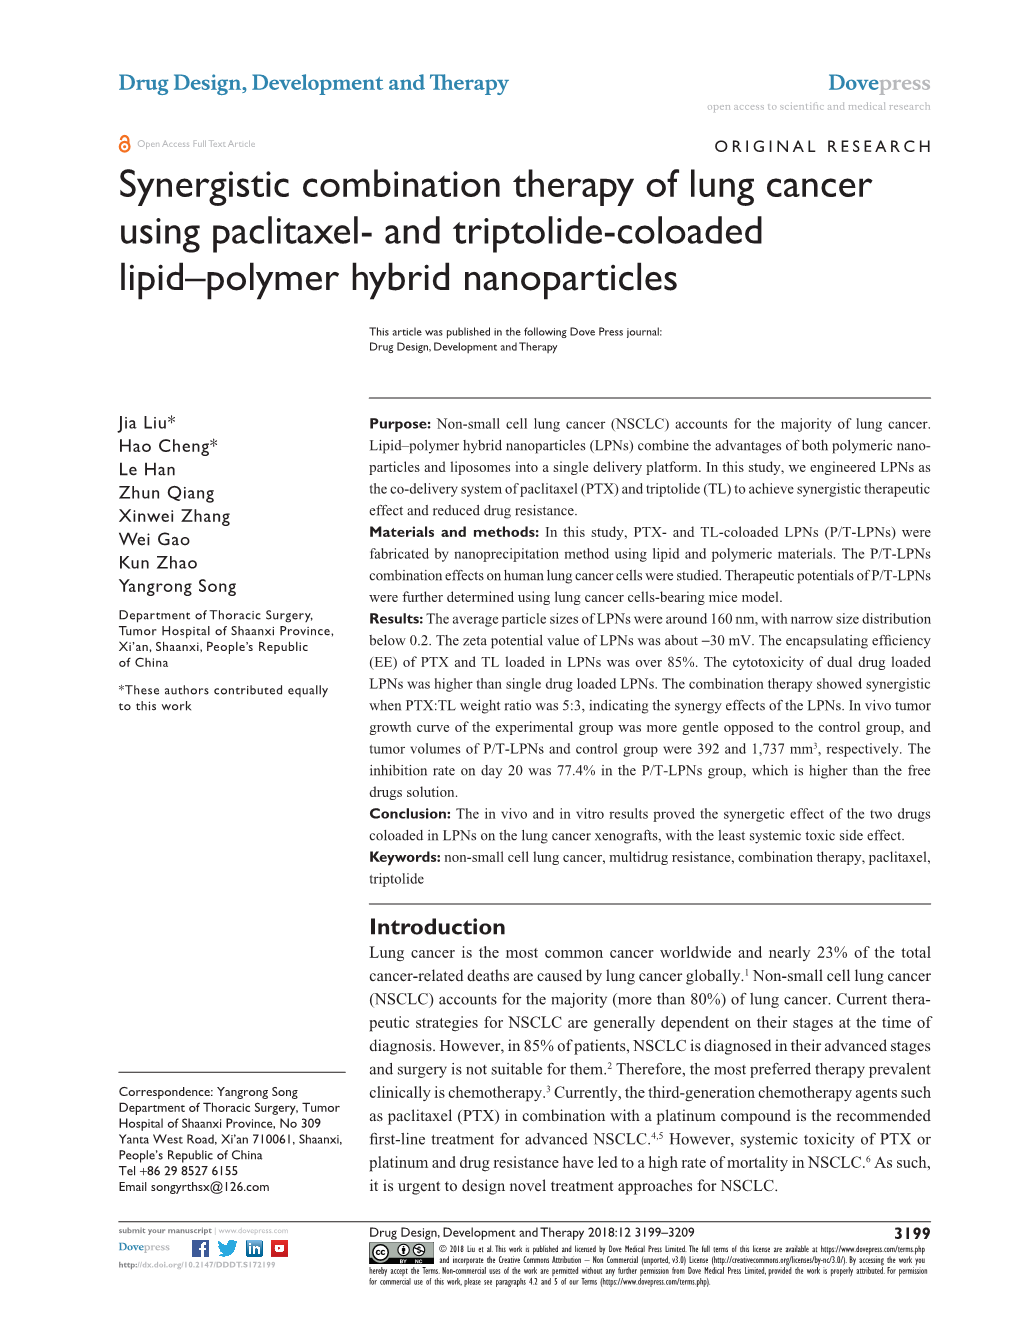 Synergistic Combination Therapy of Lung Cancer Using Paclitaxel- and Triptolide-Coloaded Lipid–Polymer Hybrid Nanoparticles